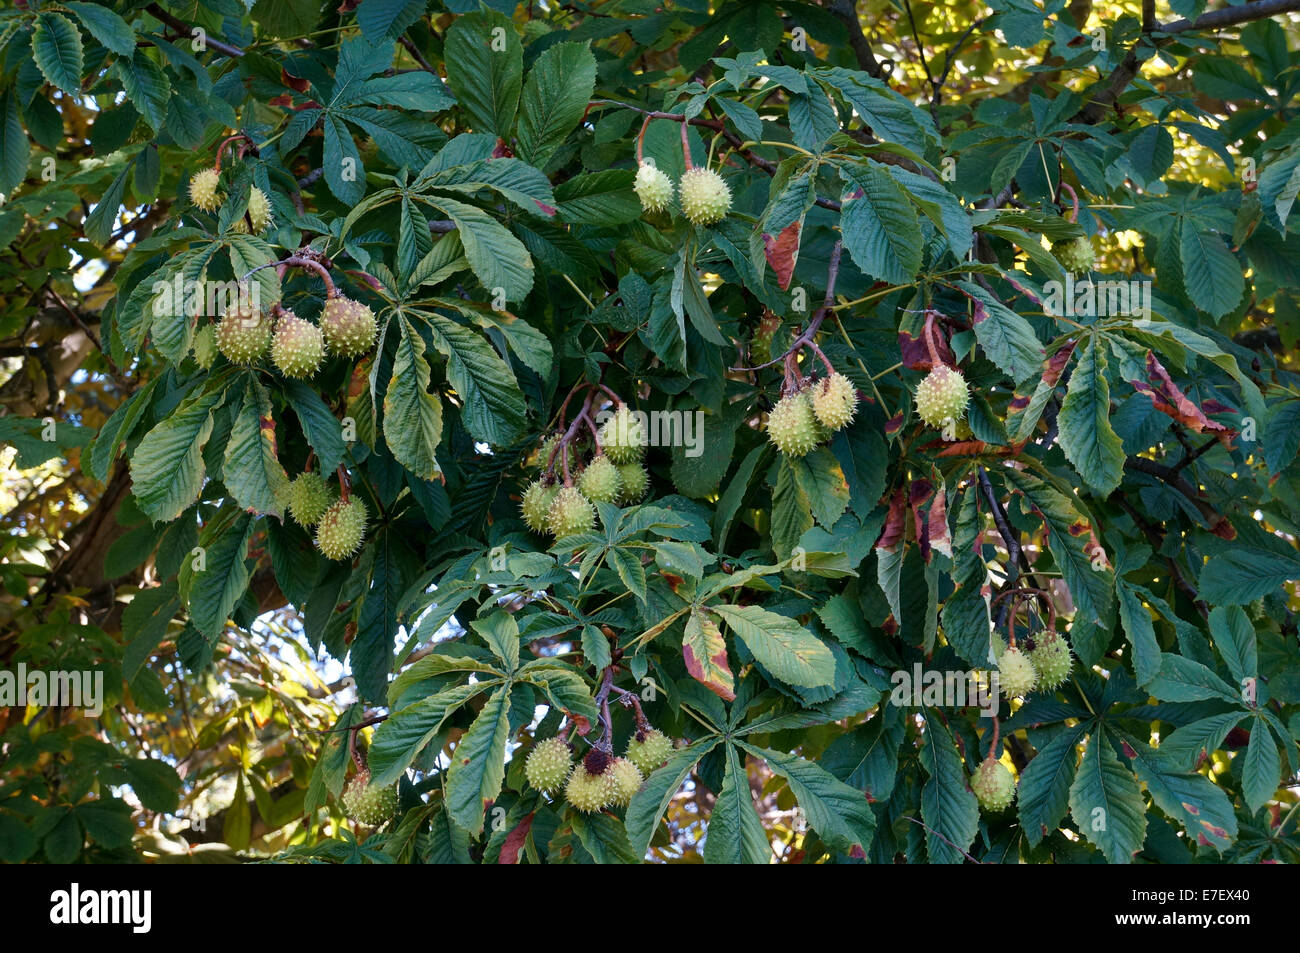 Clusters of unripe horse chestnuts on a Aesculus hippocastanum tree in Vancouver, BC, Canada Stock Photo